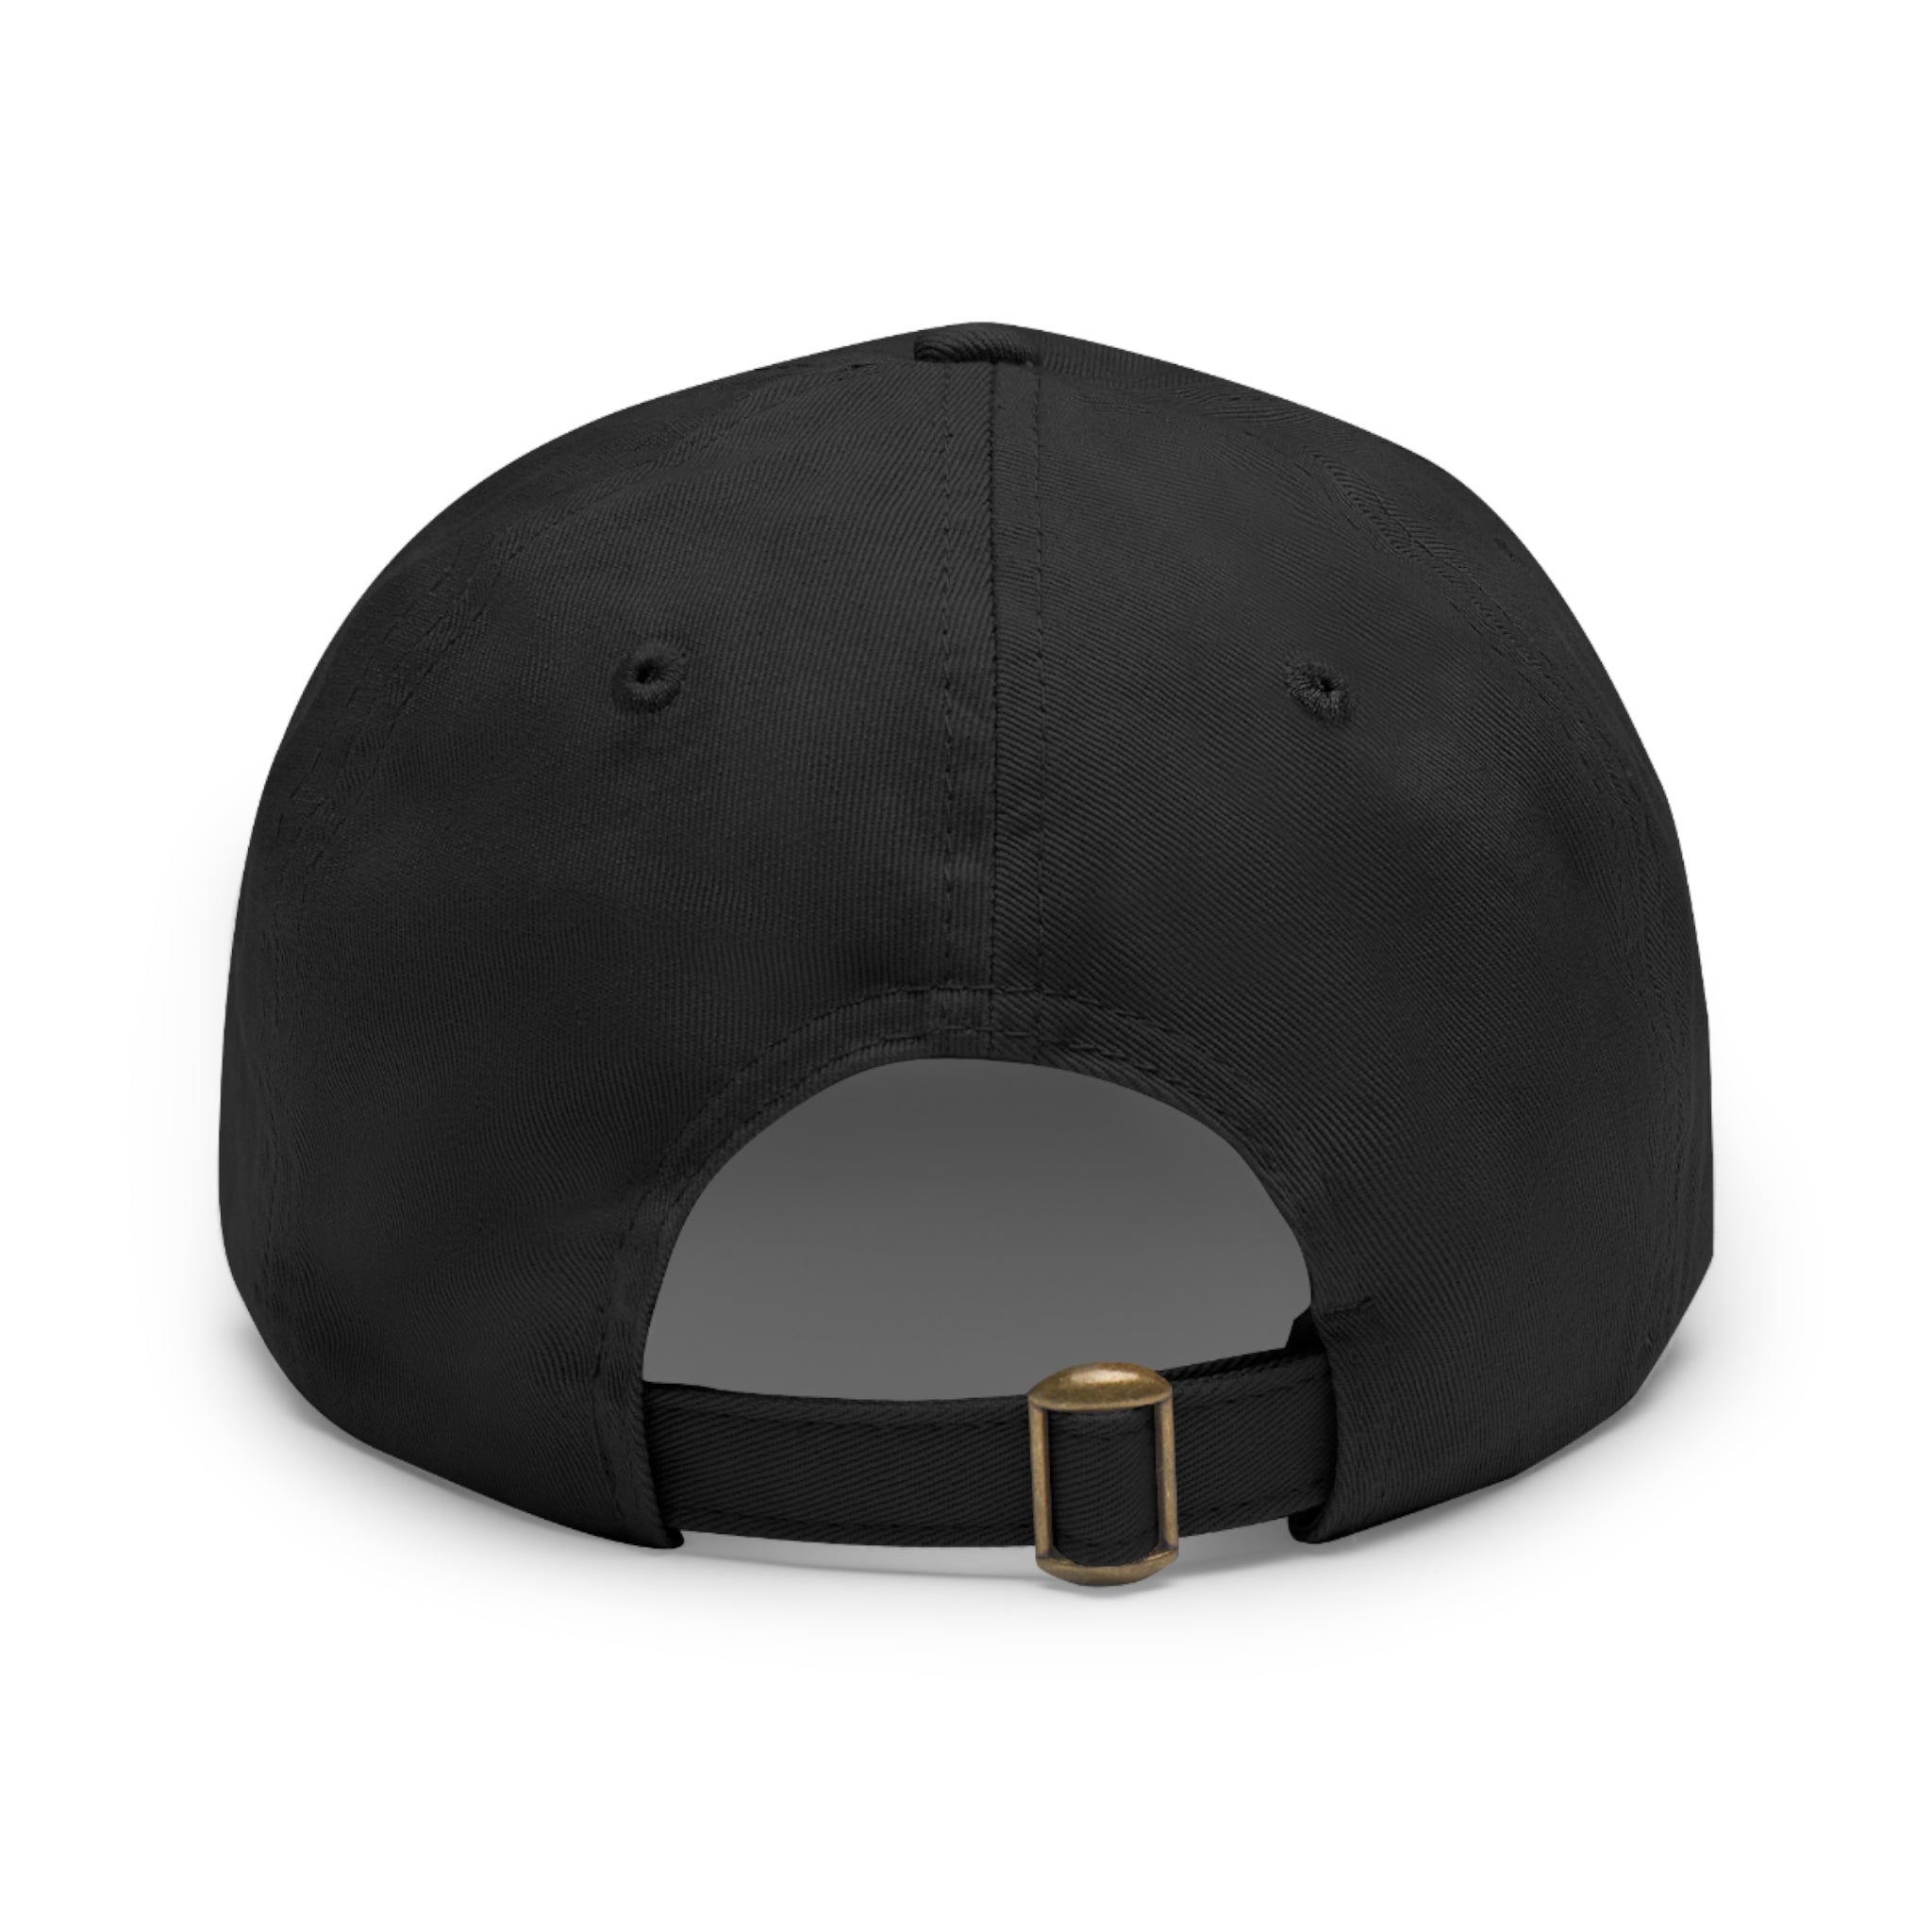 I've Got the Devil Under My Feet Hat with Rectangle Leather Patch - Shell Design Boutique